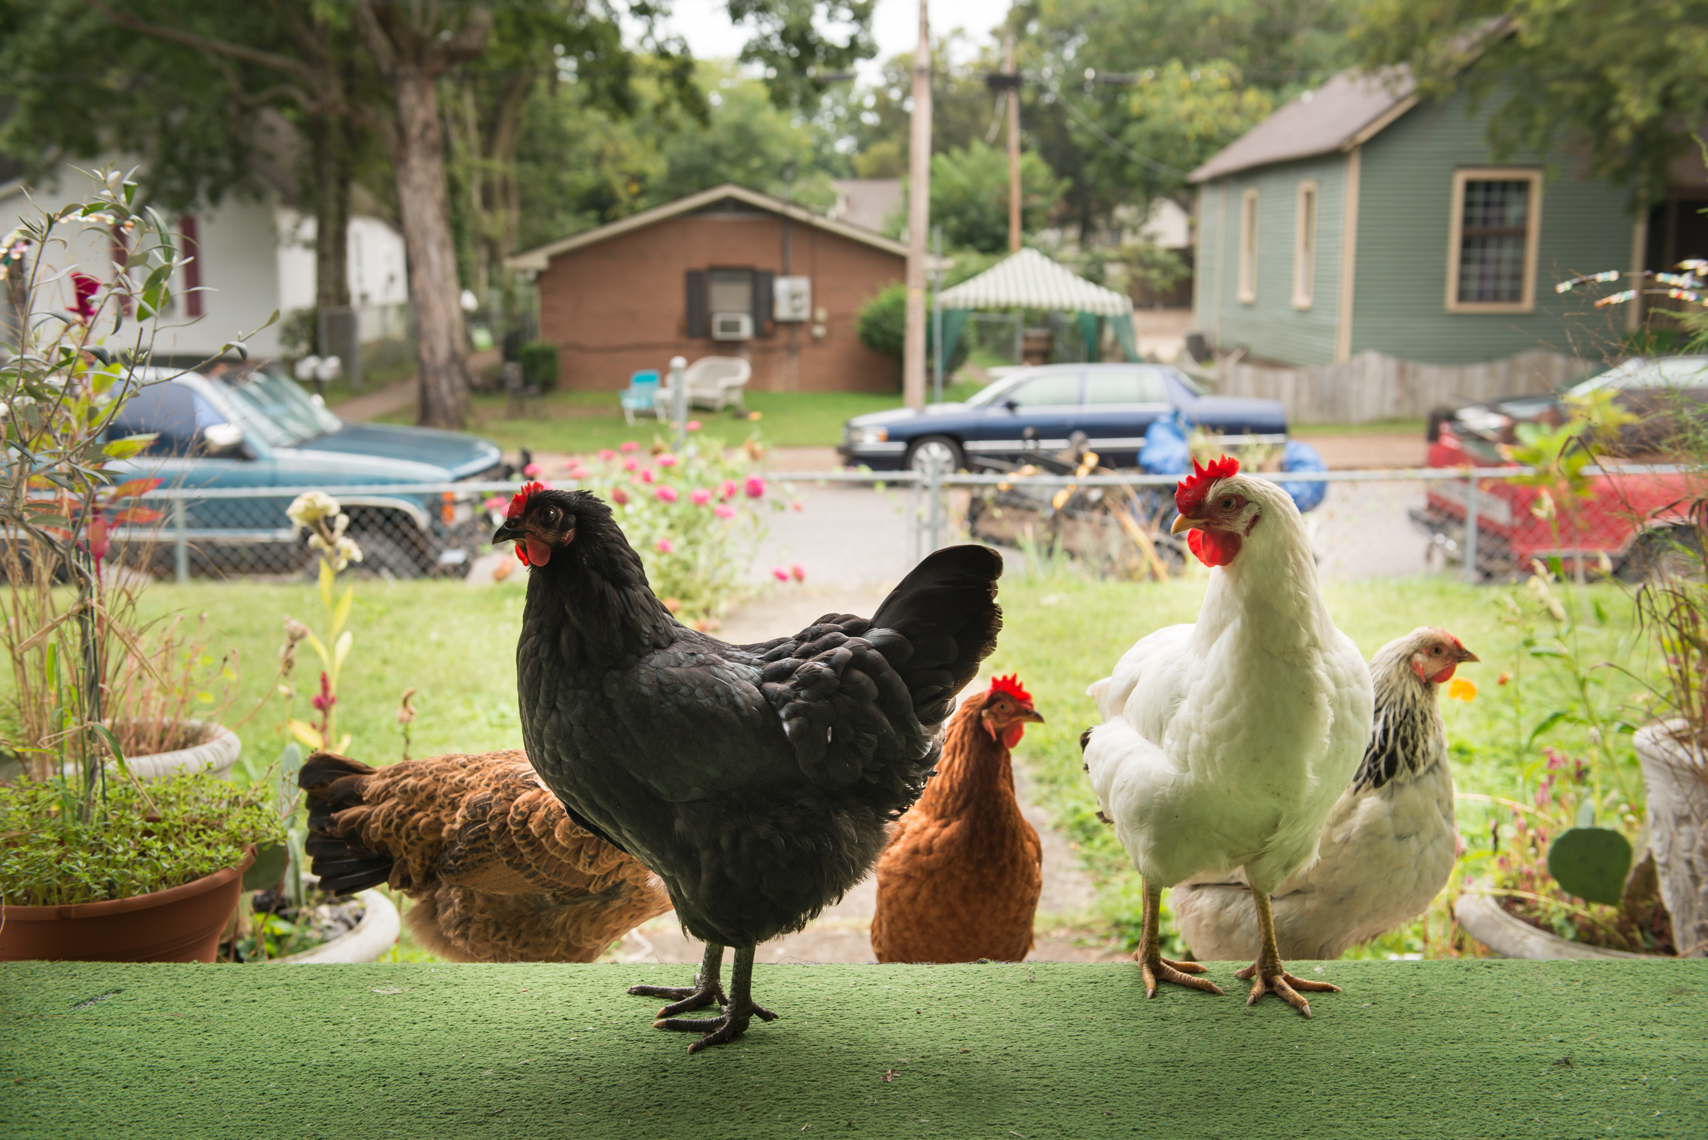 Chickens on an urban organic Farm, chickens, on a front porch, rustic, humor, Nashville documentary photographer and photojournalist, Kristina Krug